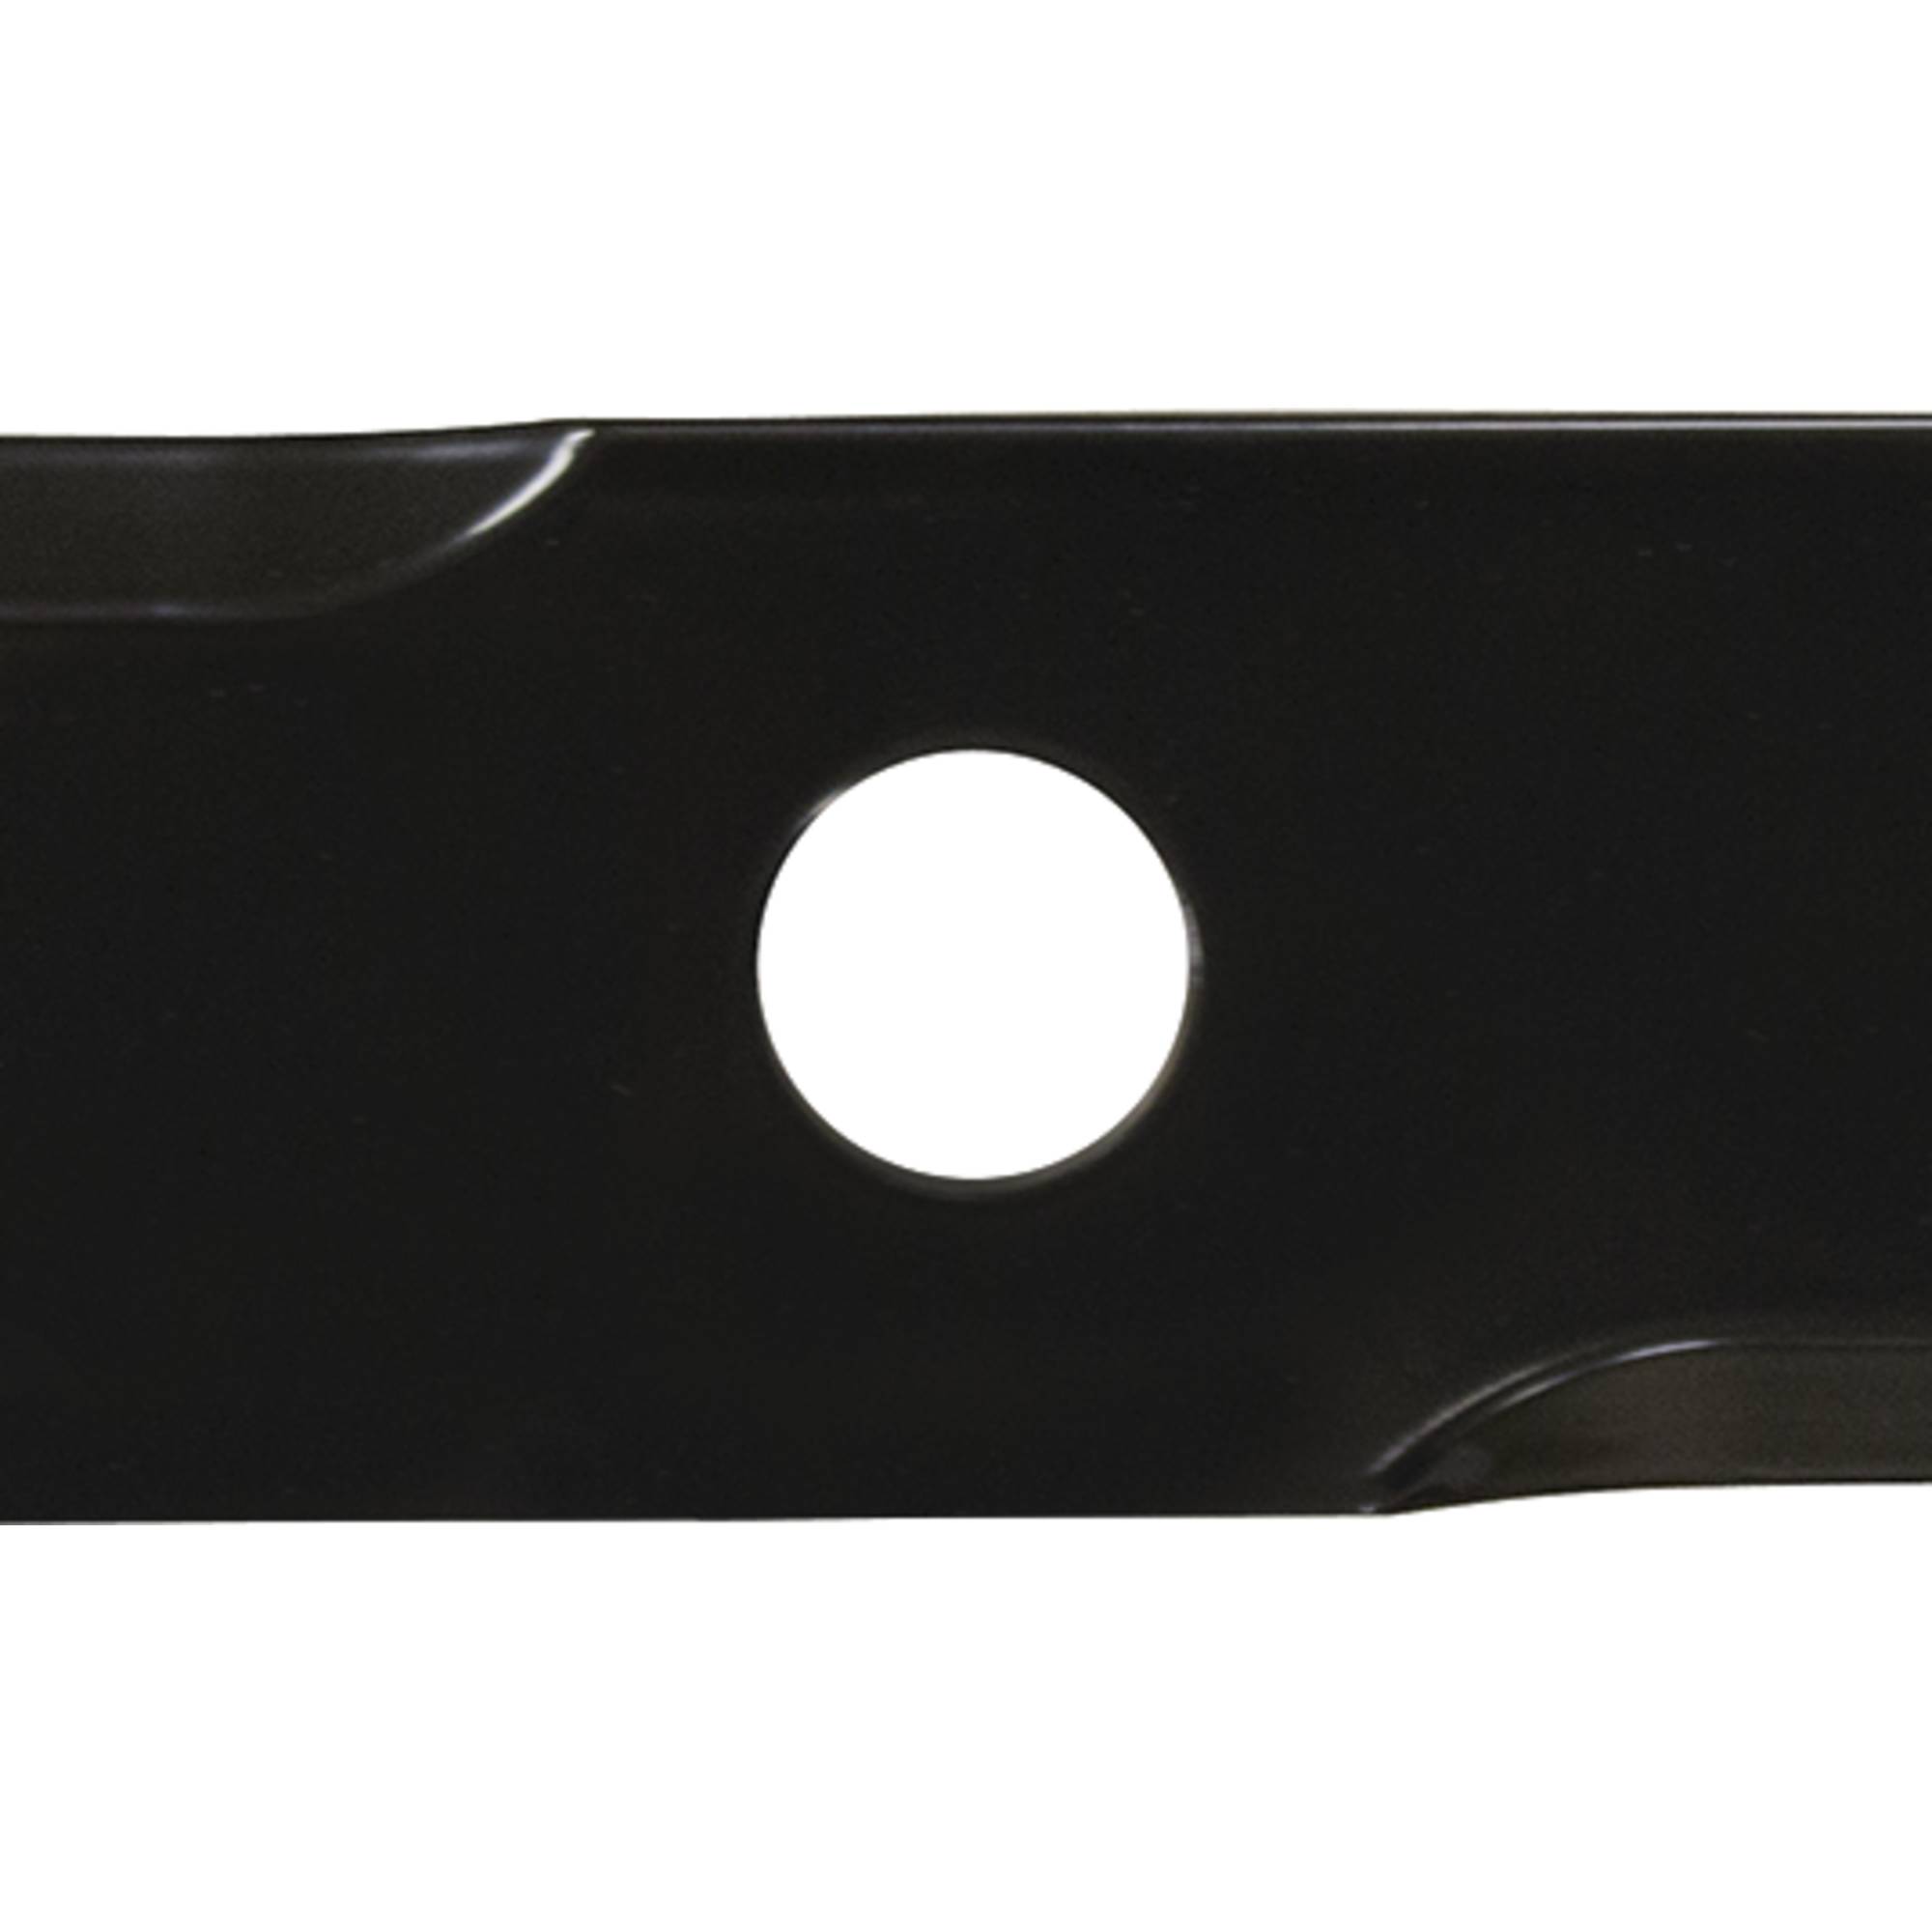 New Stens Notched Air-Lift Blade 355-335 for Exmark 103-6401-S - image 4 of 4